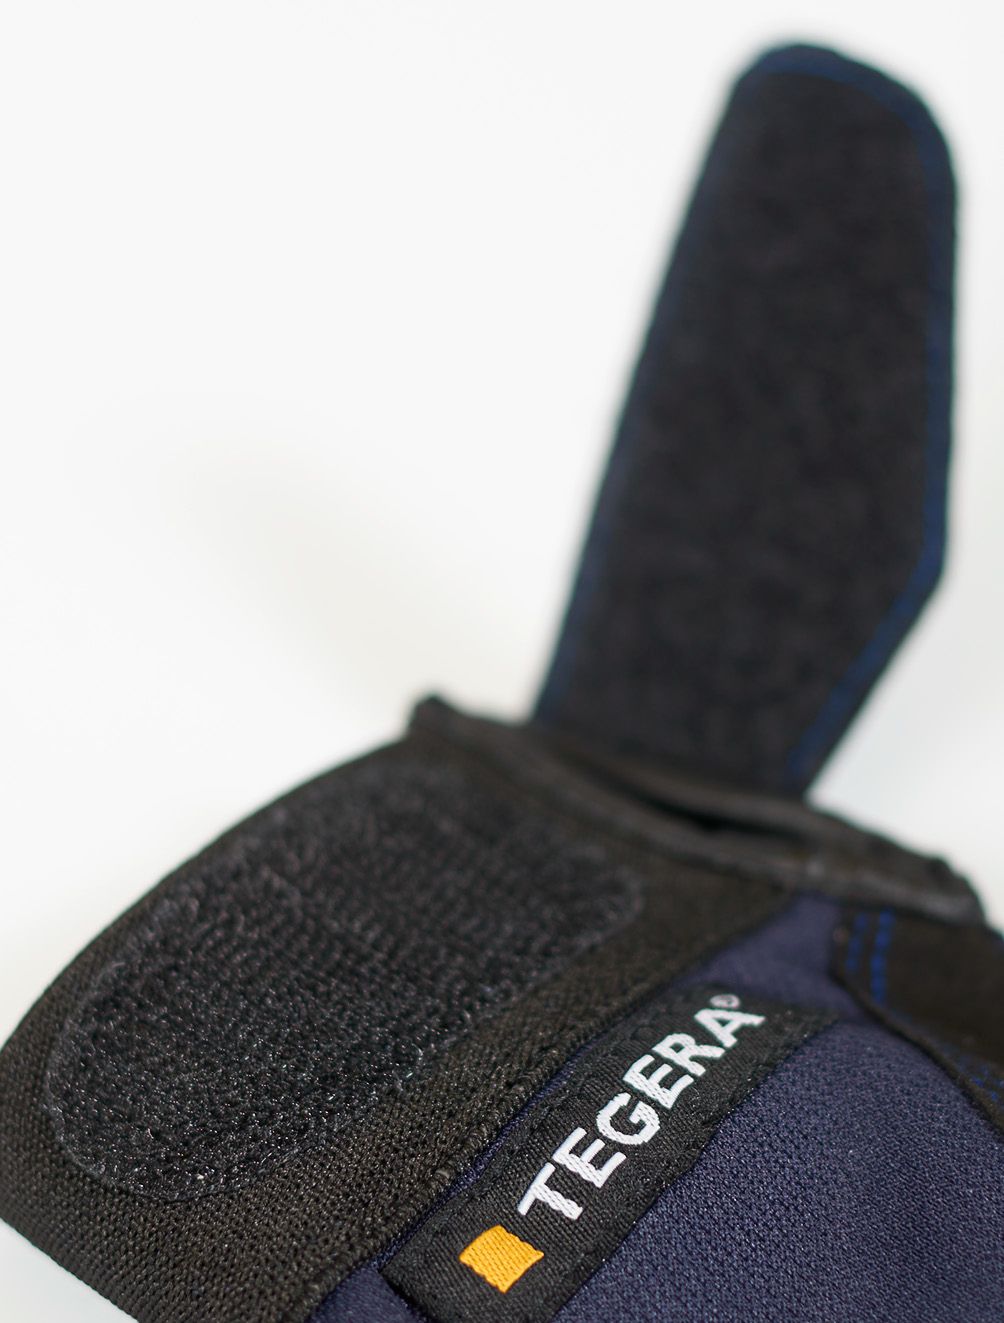 Velcro Wrist Strap for a Secure Fit